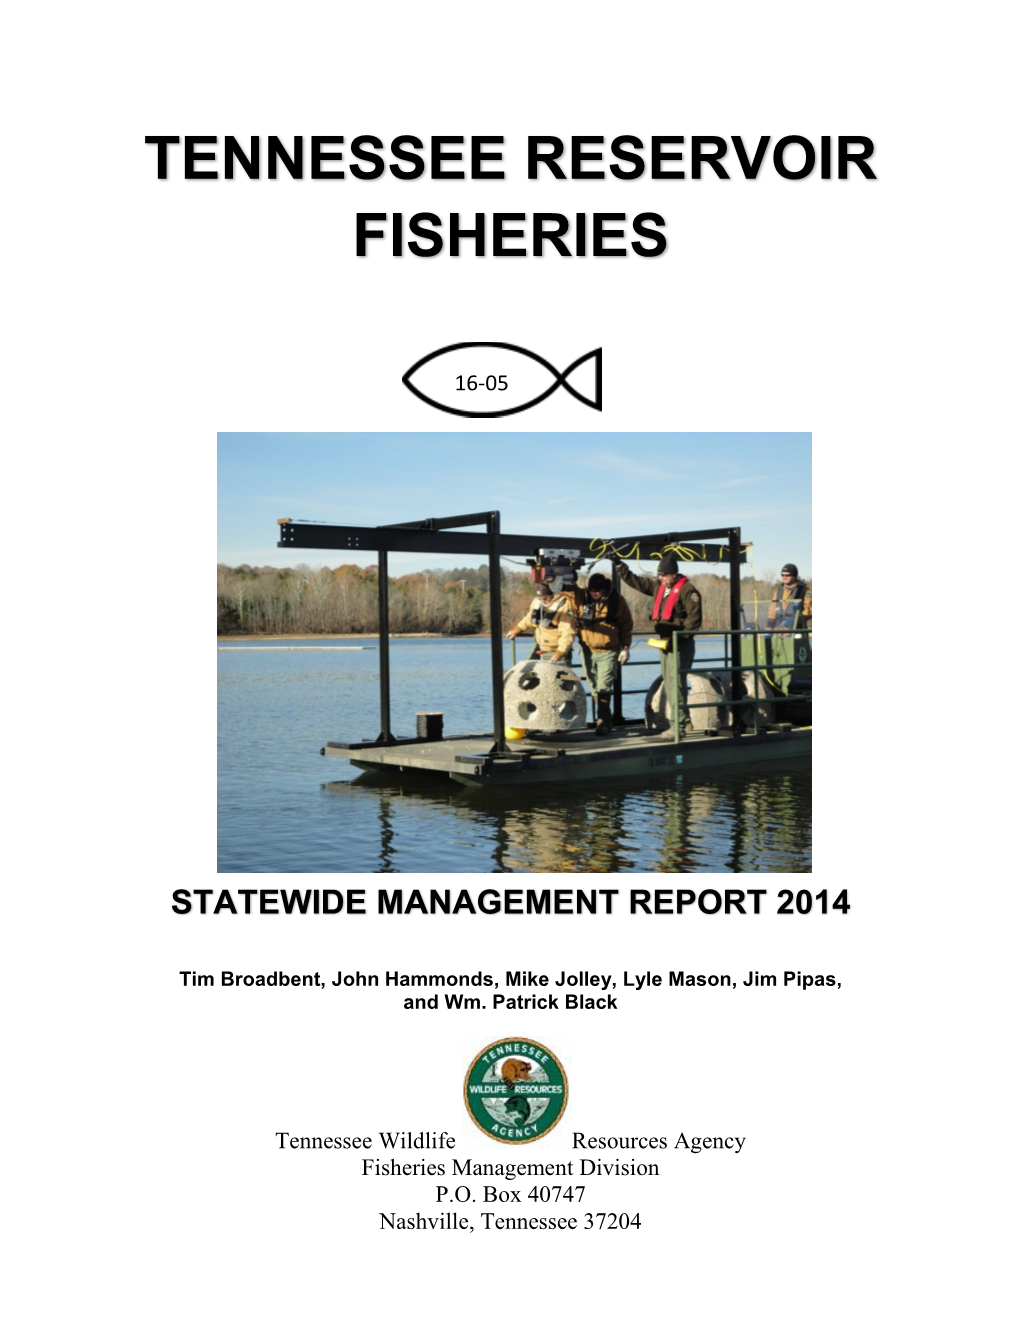 Tennessee Reservoir Fisheries